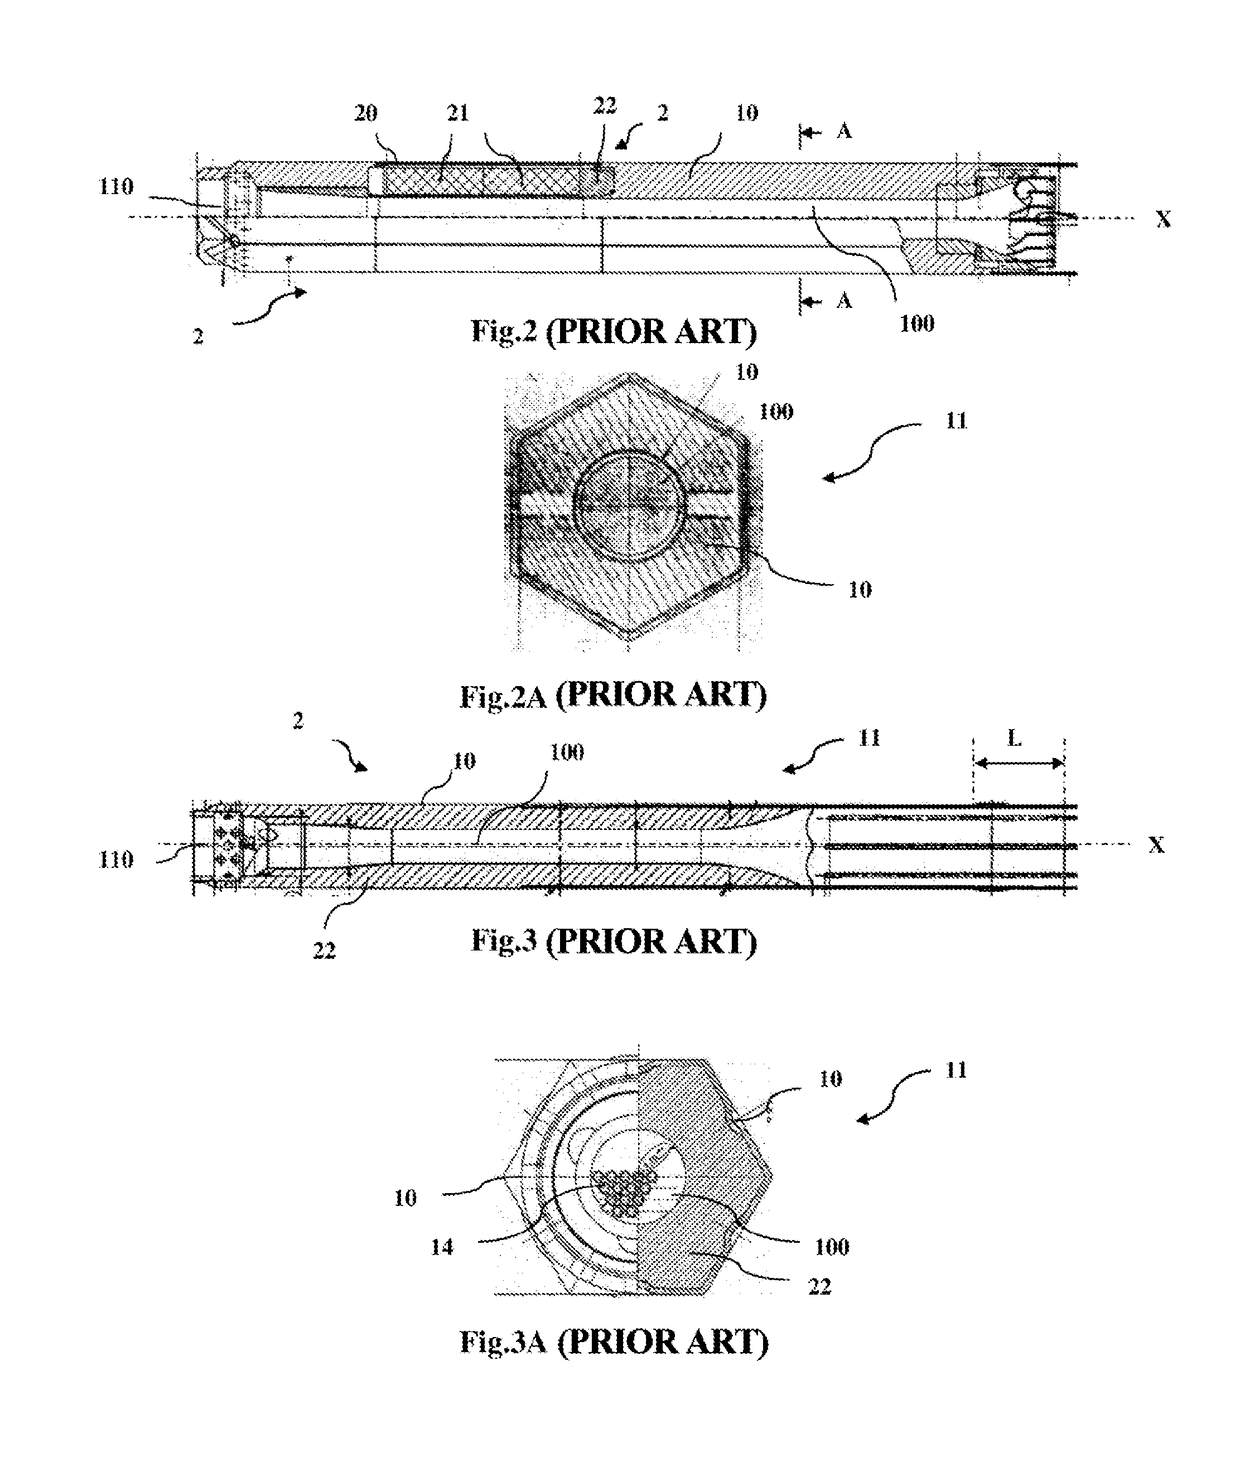 Fuel Assembly For An SFR Nuclear Reactor, Comprising A Housing Containing A Removably Fastened Upper Neutron Shielding Device